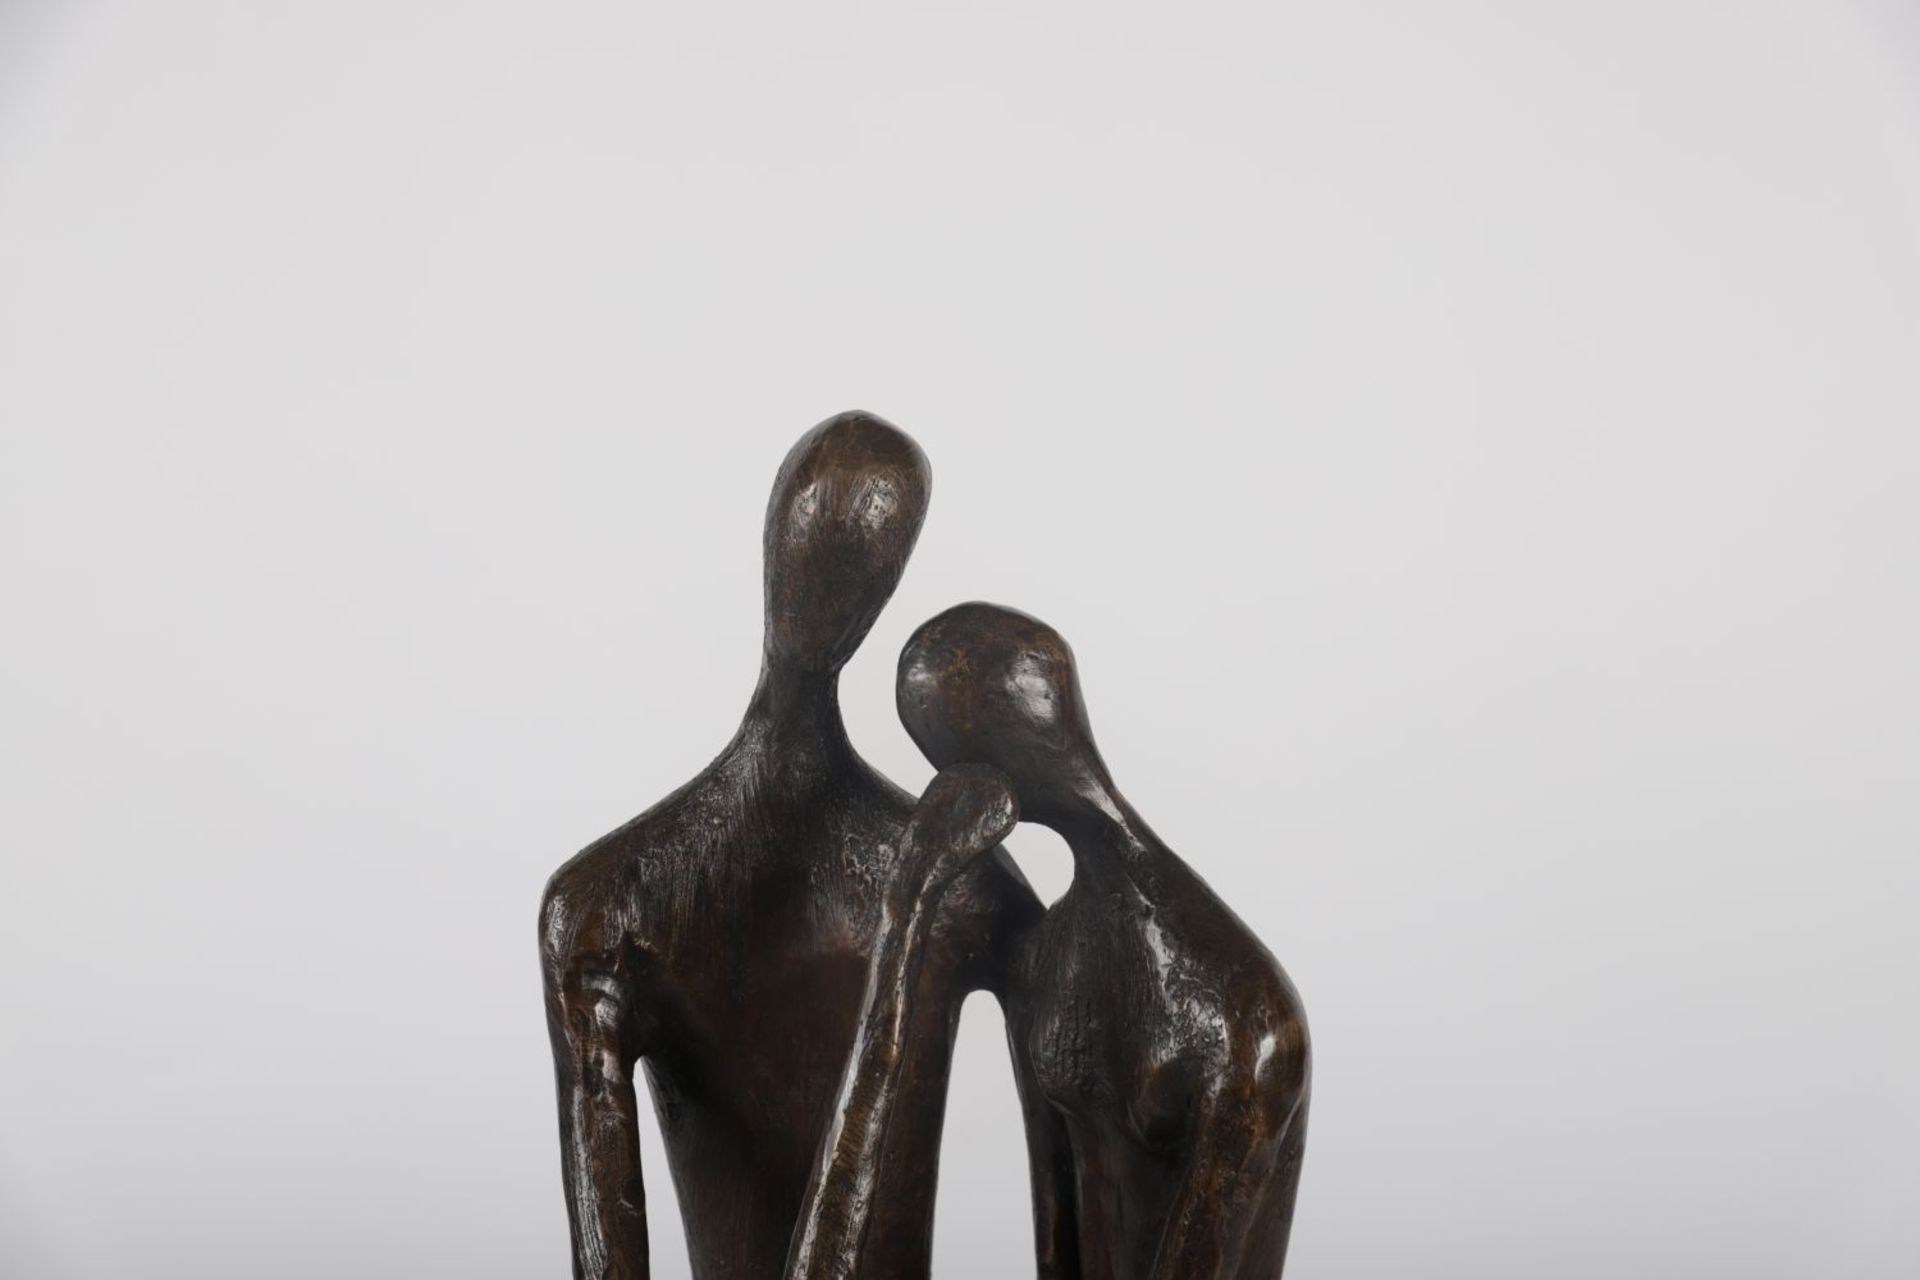 20TH-CENTURY ABSTRACT BRONZE SCULPTURE - Image 3 of 3